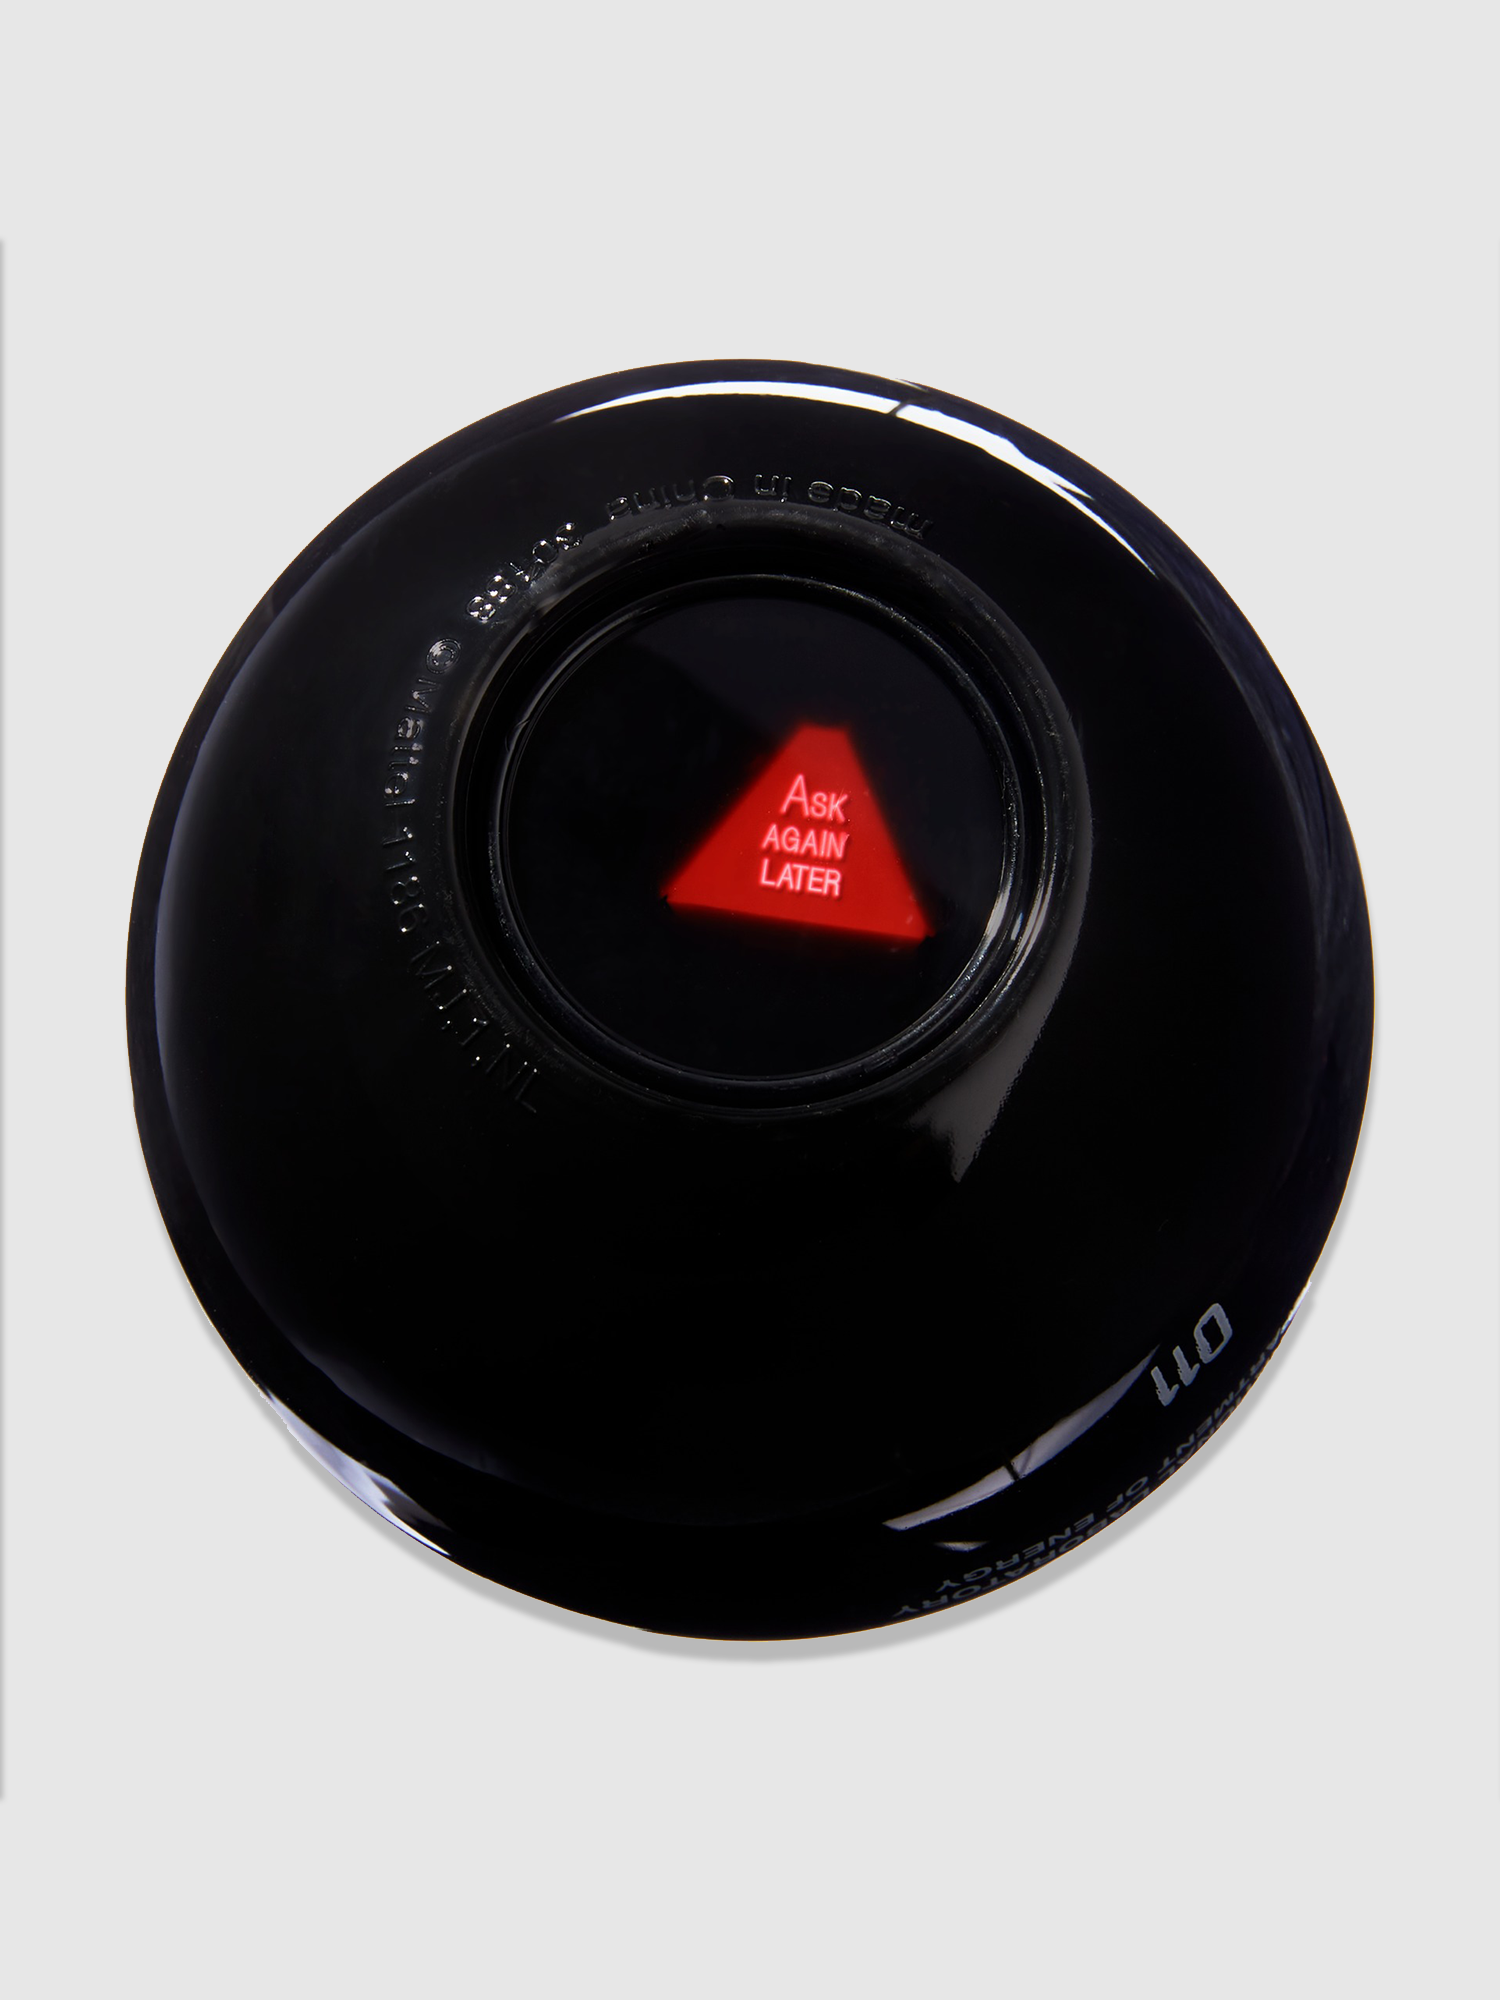 Elex's Magic 8-Ball for Android